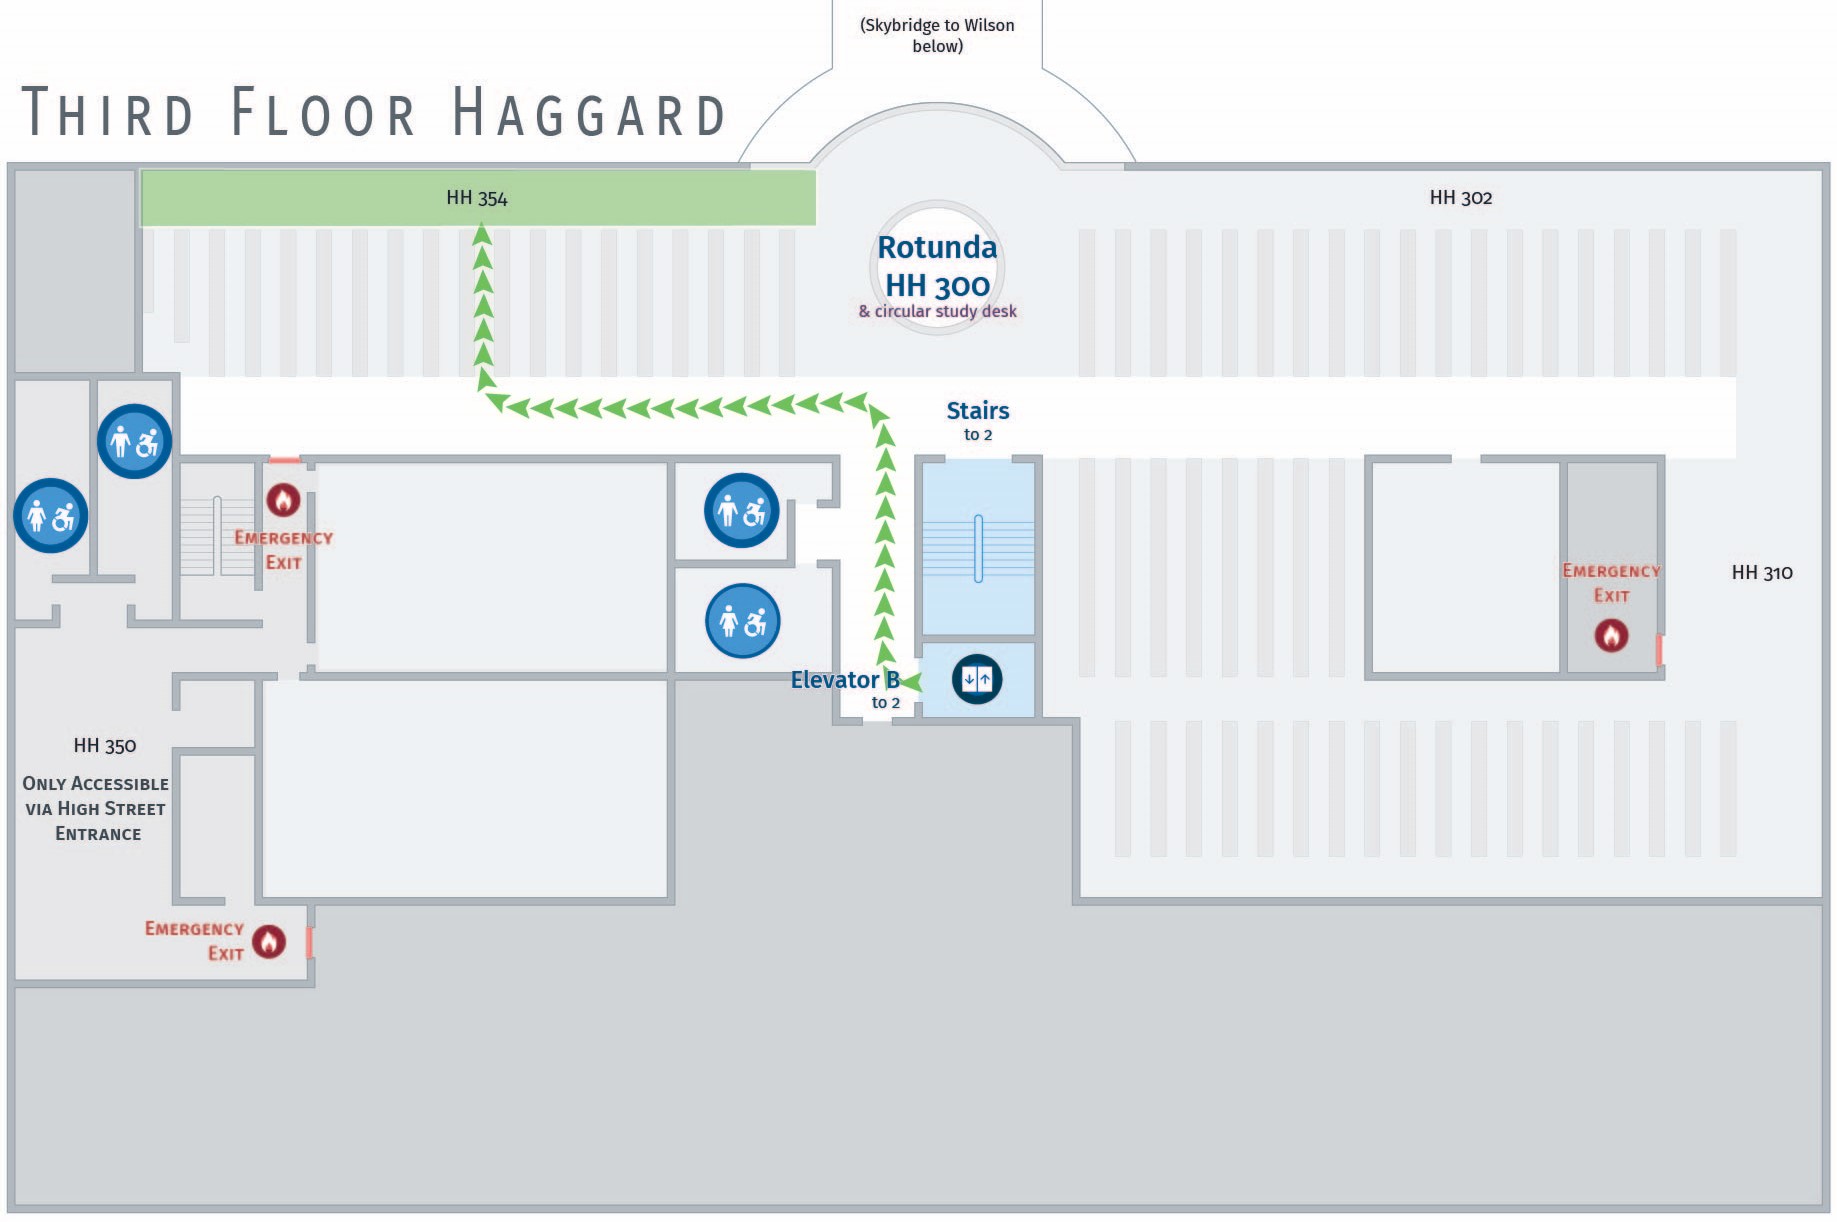 Floor plan, third floor of Haggard with accessible path to HH 354.